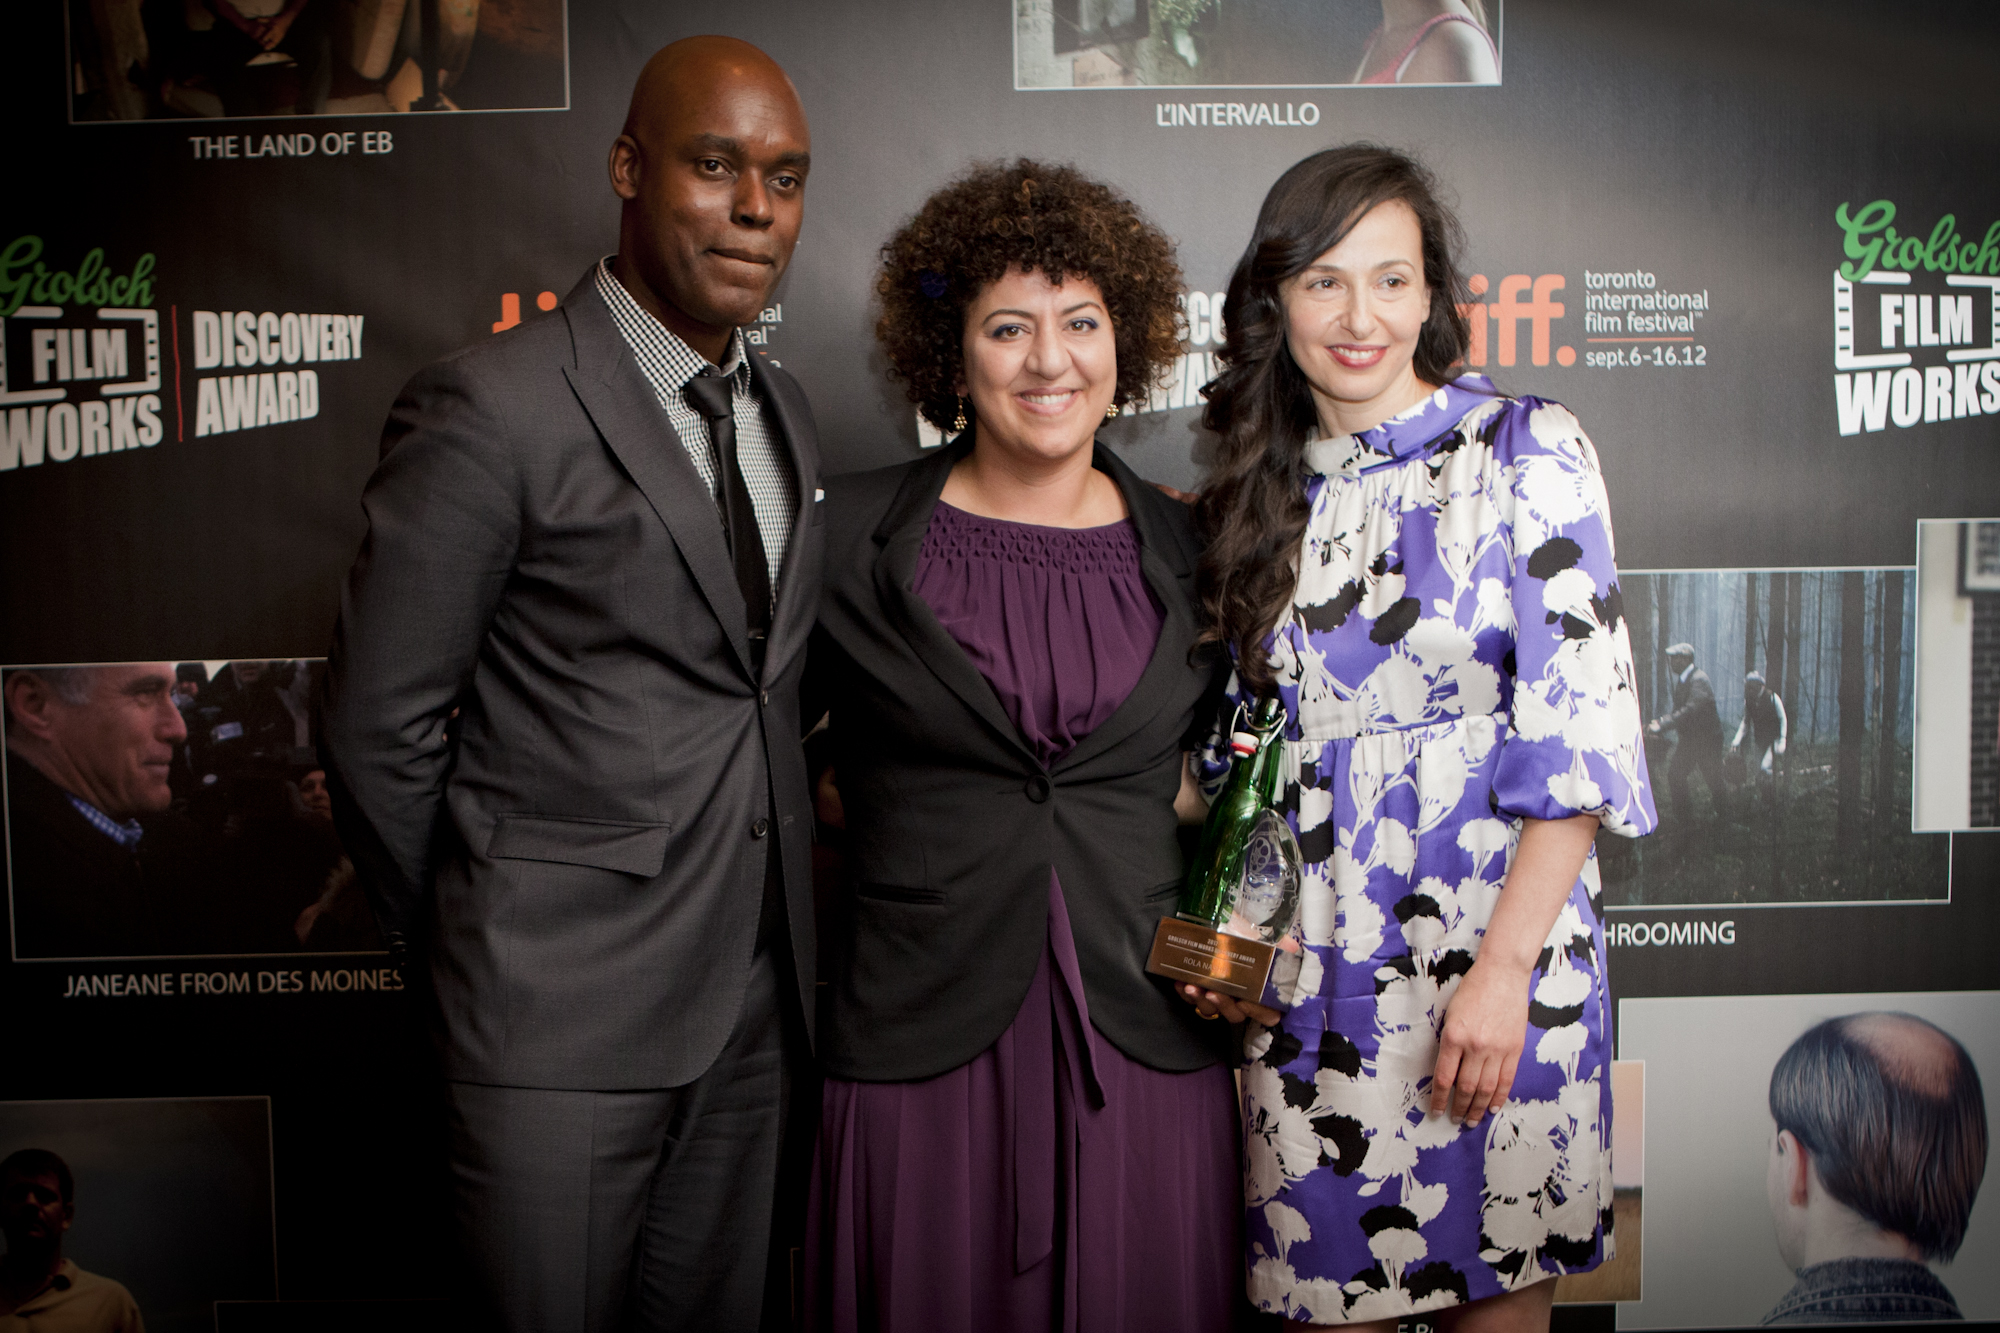 DEBUT-FEATURE FILMMAKER ROLA NASHEF HONOURED WITH GROLSCH FILM WORKS DISCOVERY AWARD AT THE TORONTO INTERNATIONAL FILM FESTIVAL